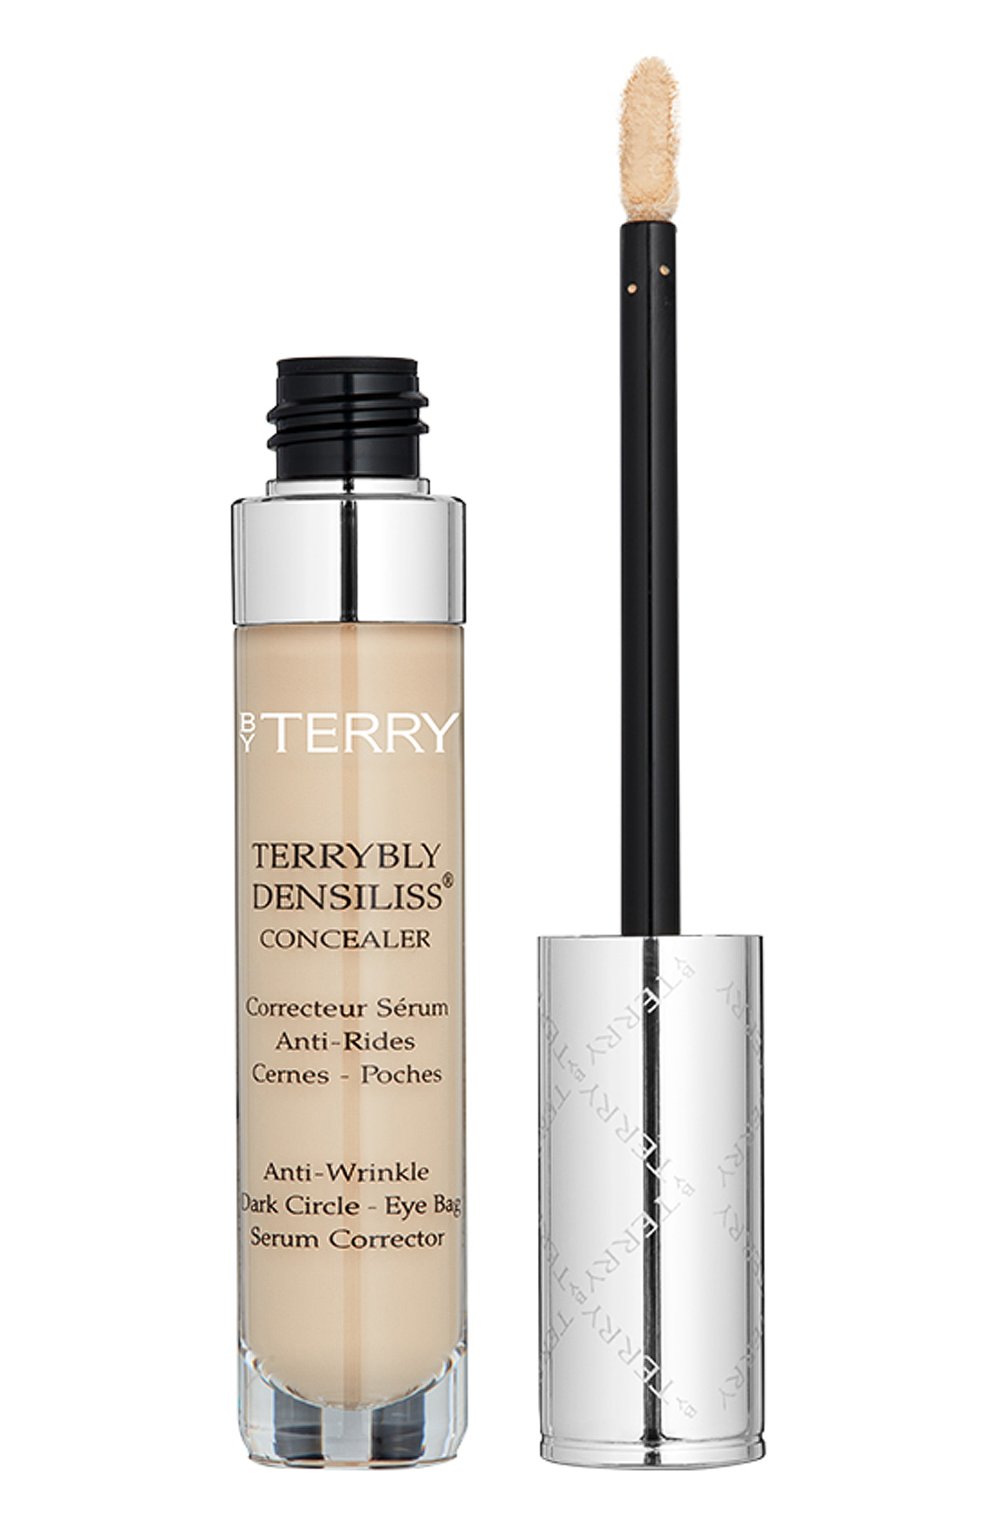 Консилер terrybly densiliss concealer, 3 natural beige (7ml) BY TERRY  цвета, арт. V19121003 | Фото 1